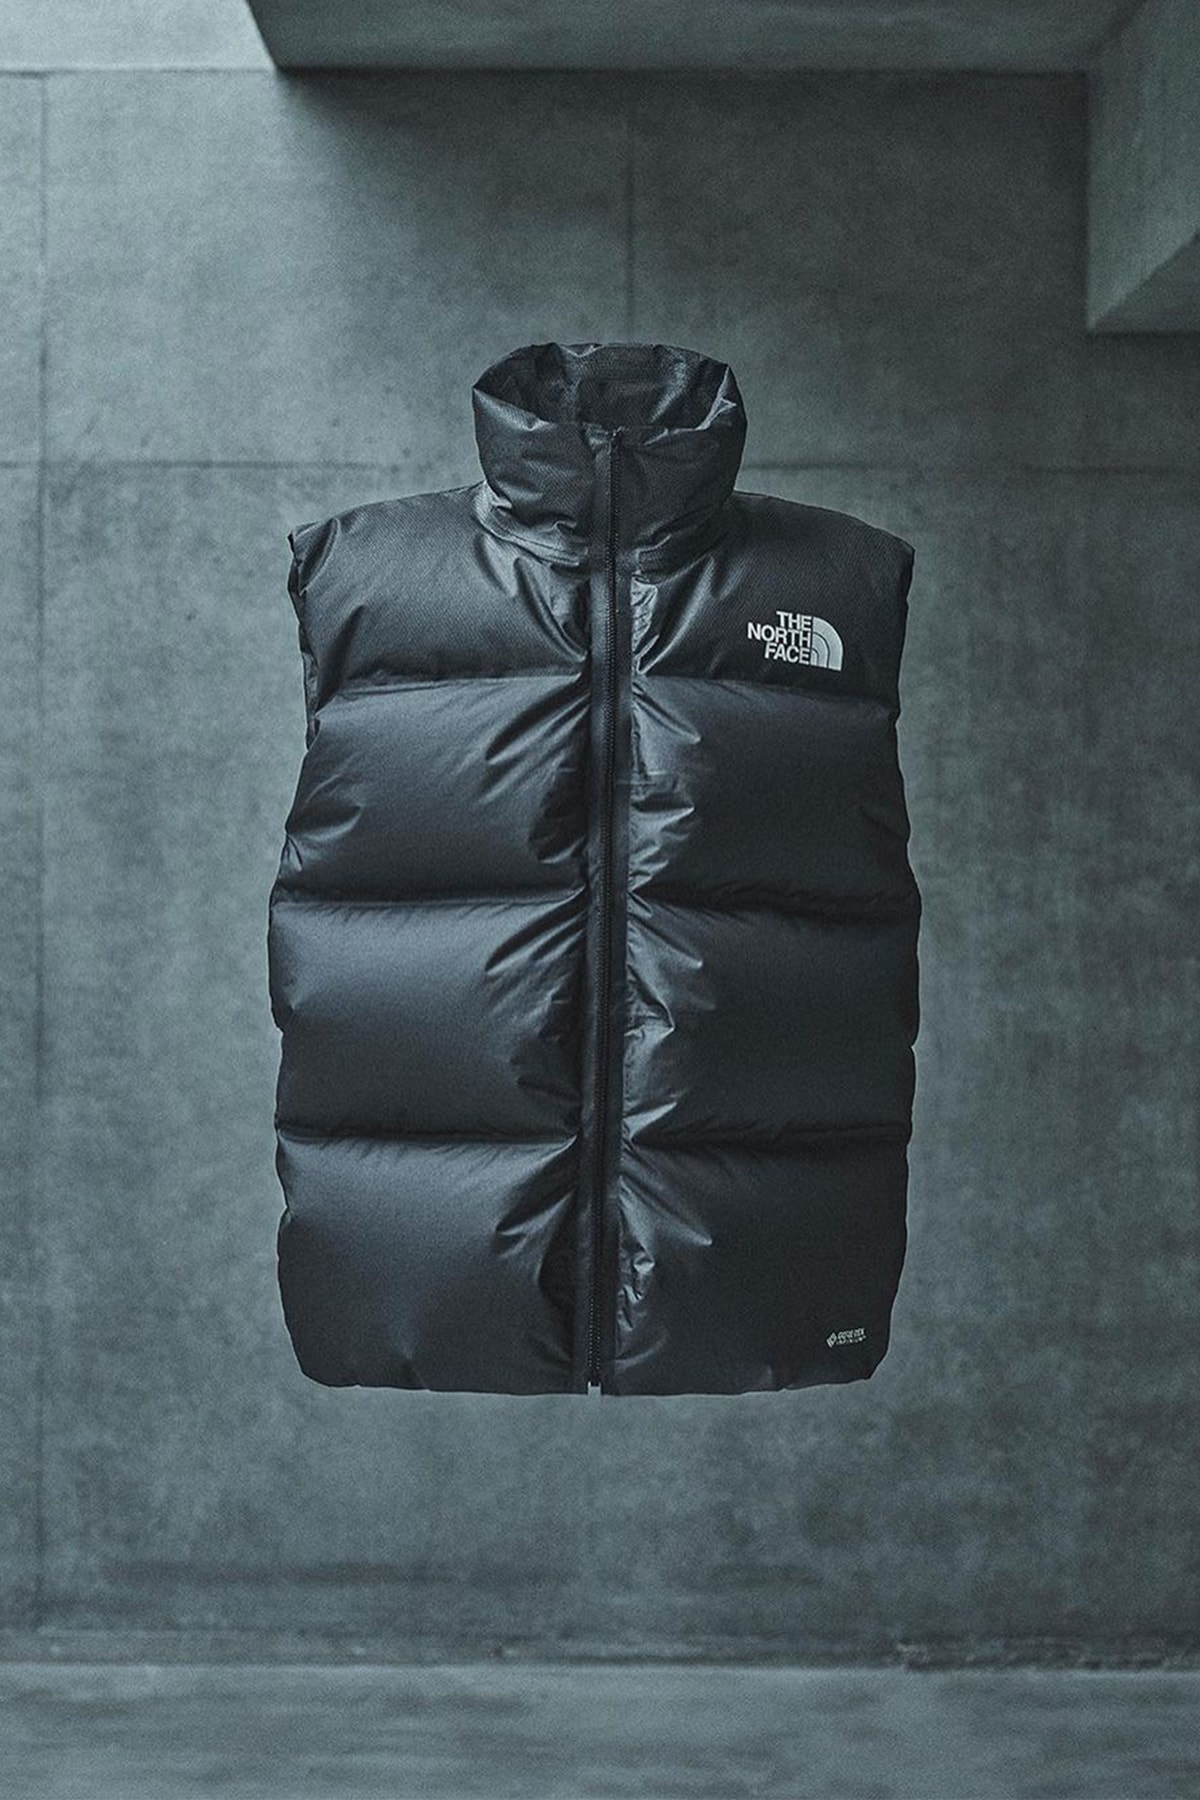 Inflatable Jackets Have Arrived: Move over Puffer's